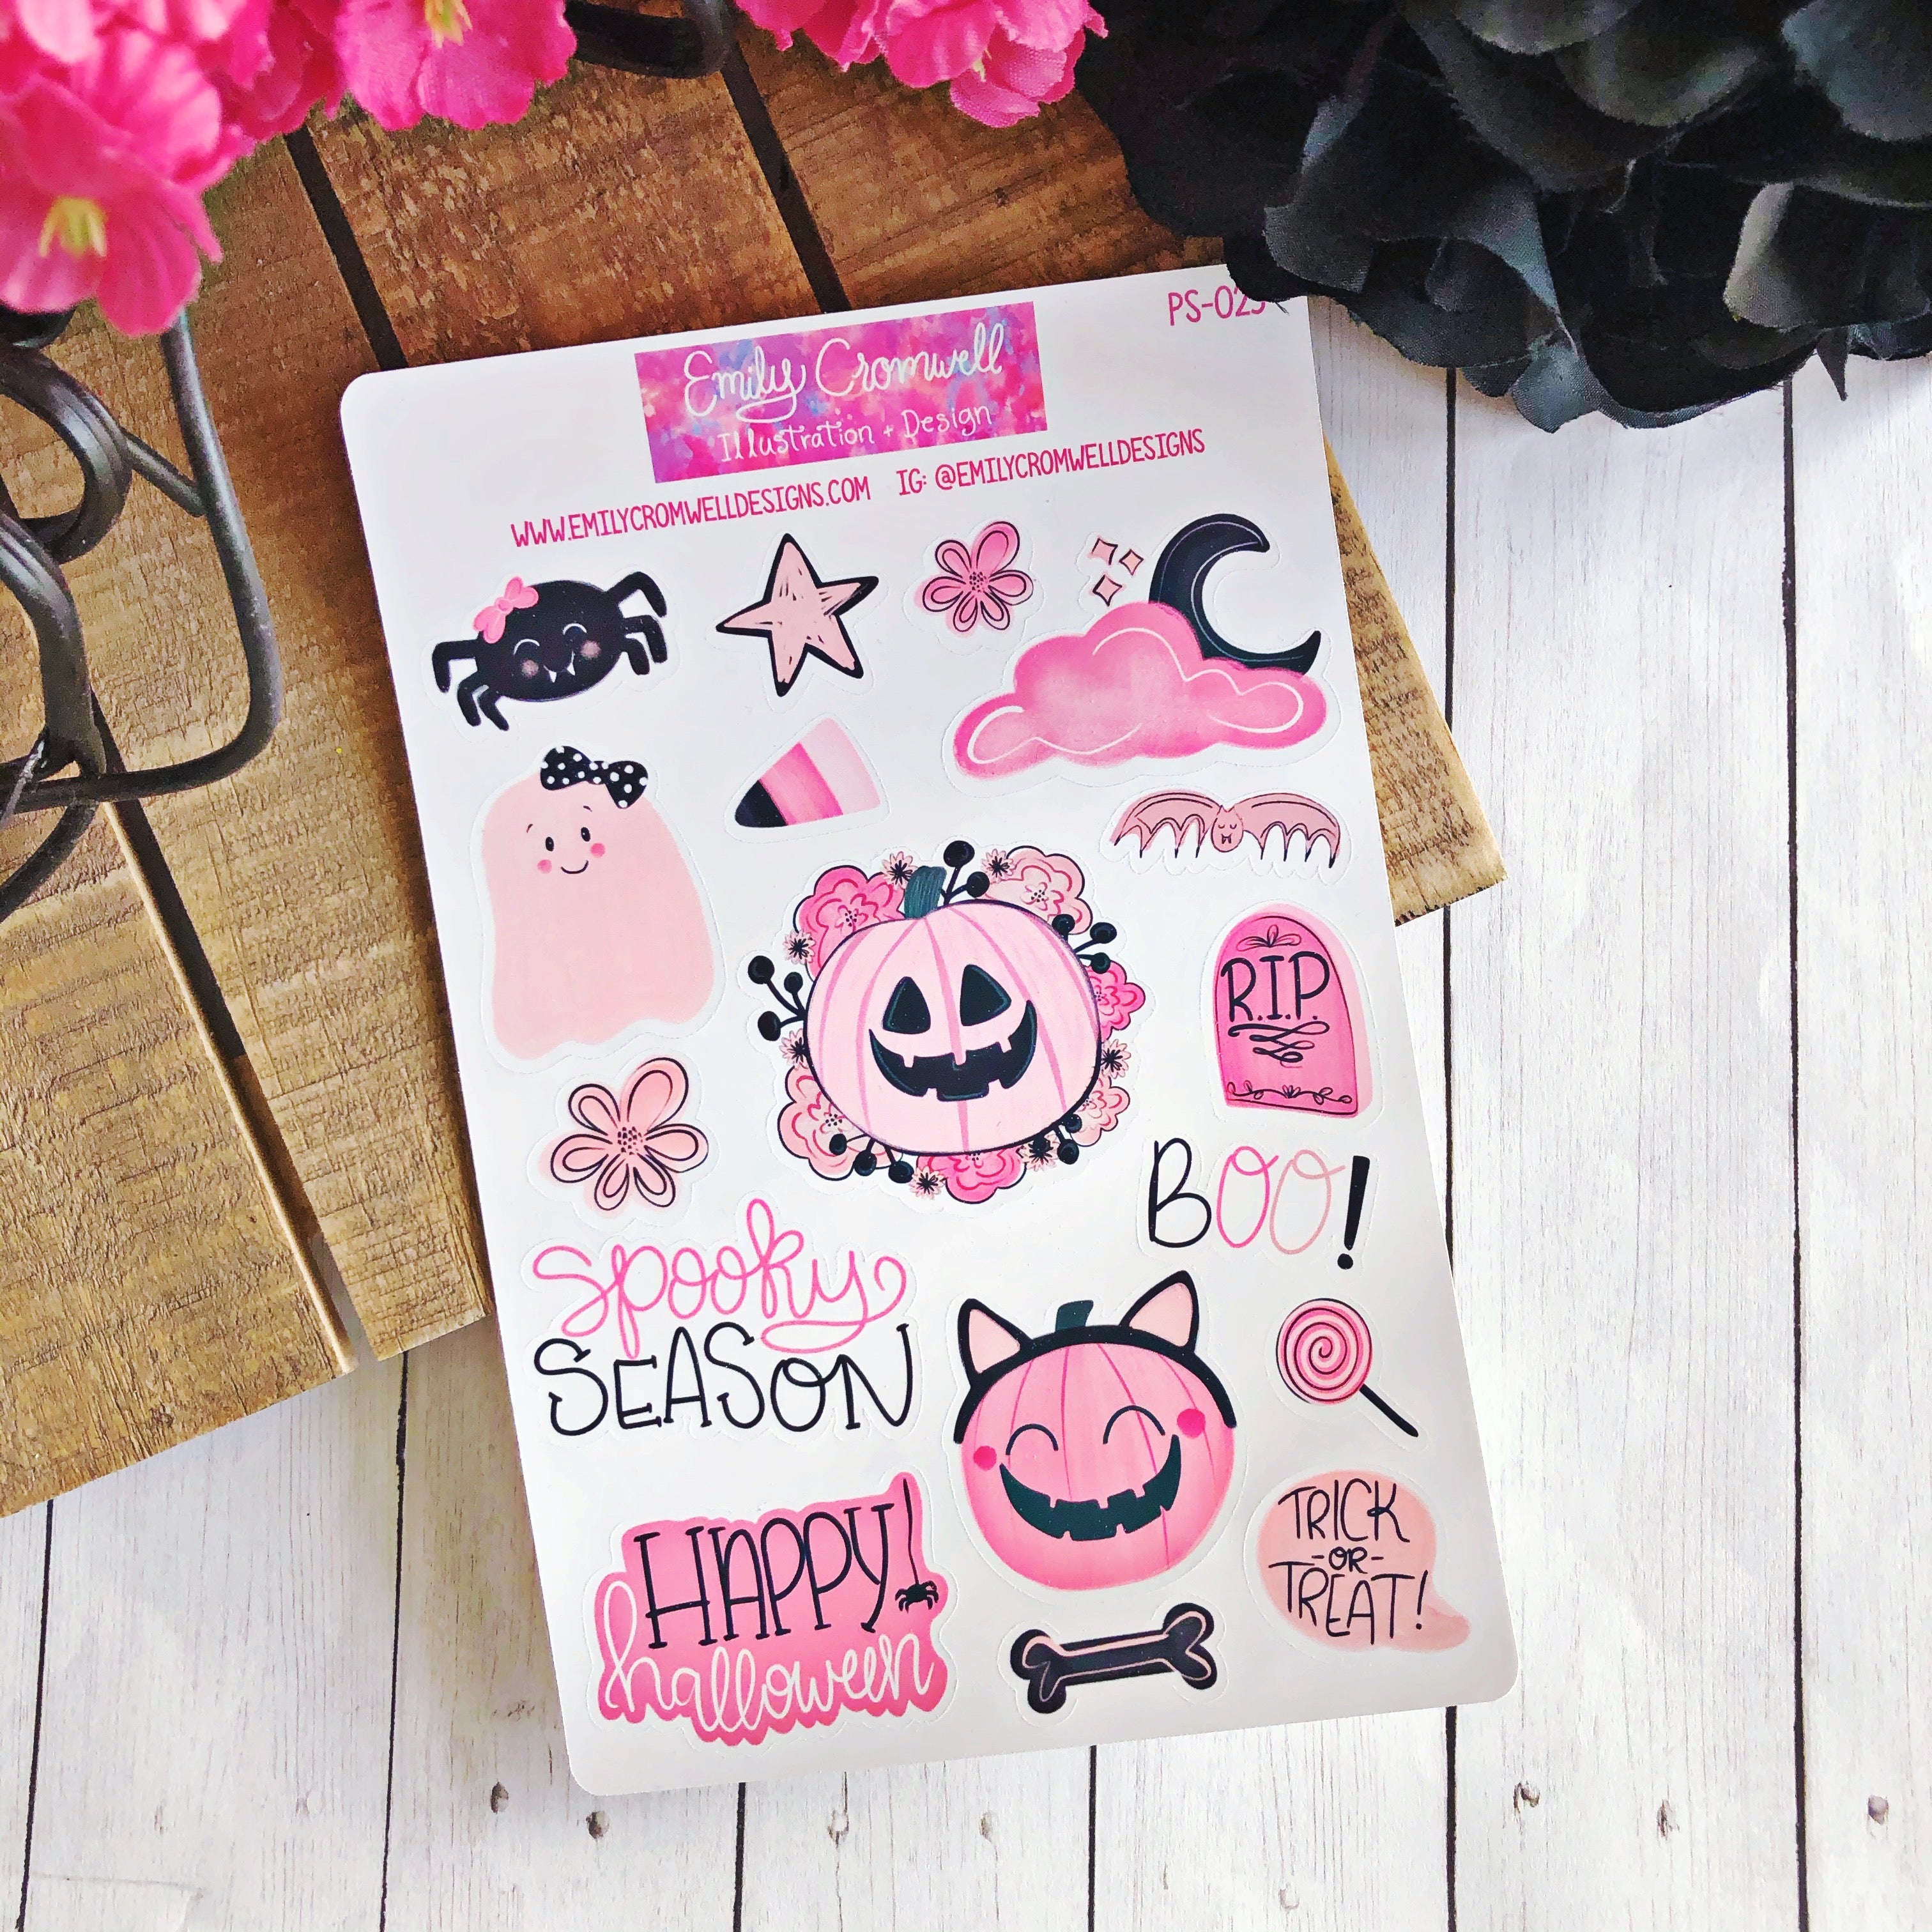 Cozy Home Craft Stickers: Charming Sticker Sheets for Journaling and  Decorating - Perfect for Stickers, Craft Stickers, Journaling Stickers, and  More!